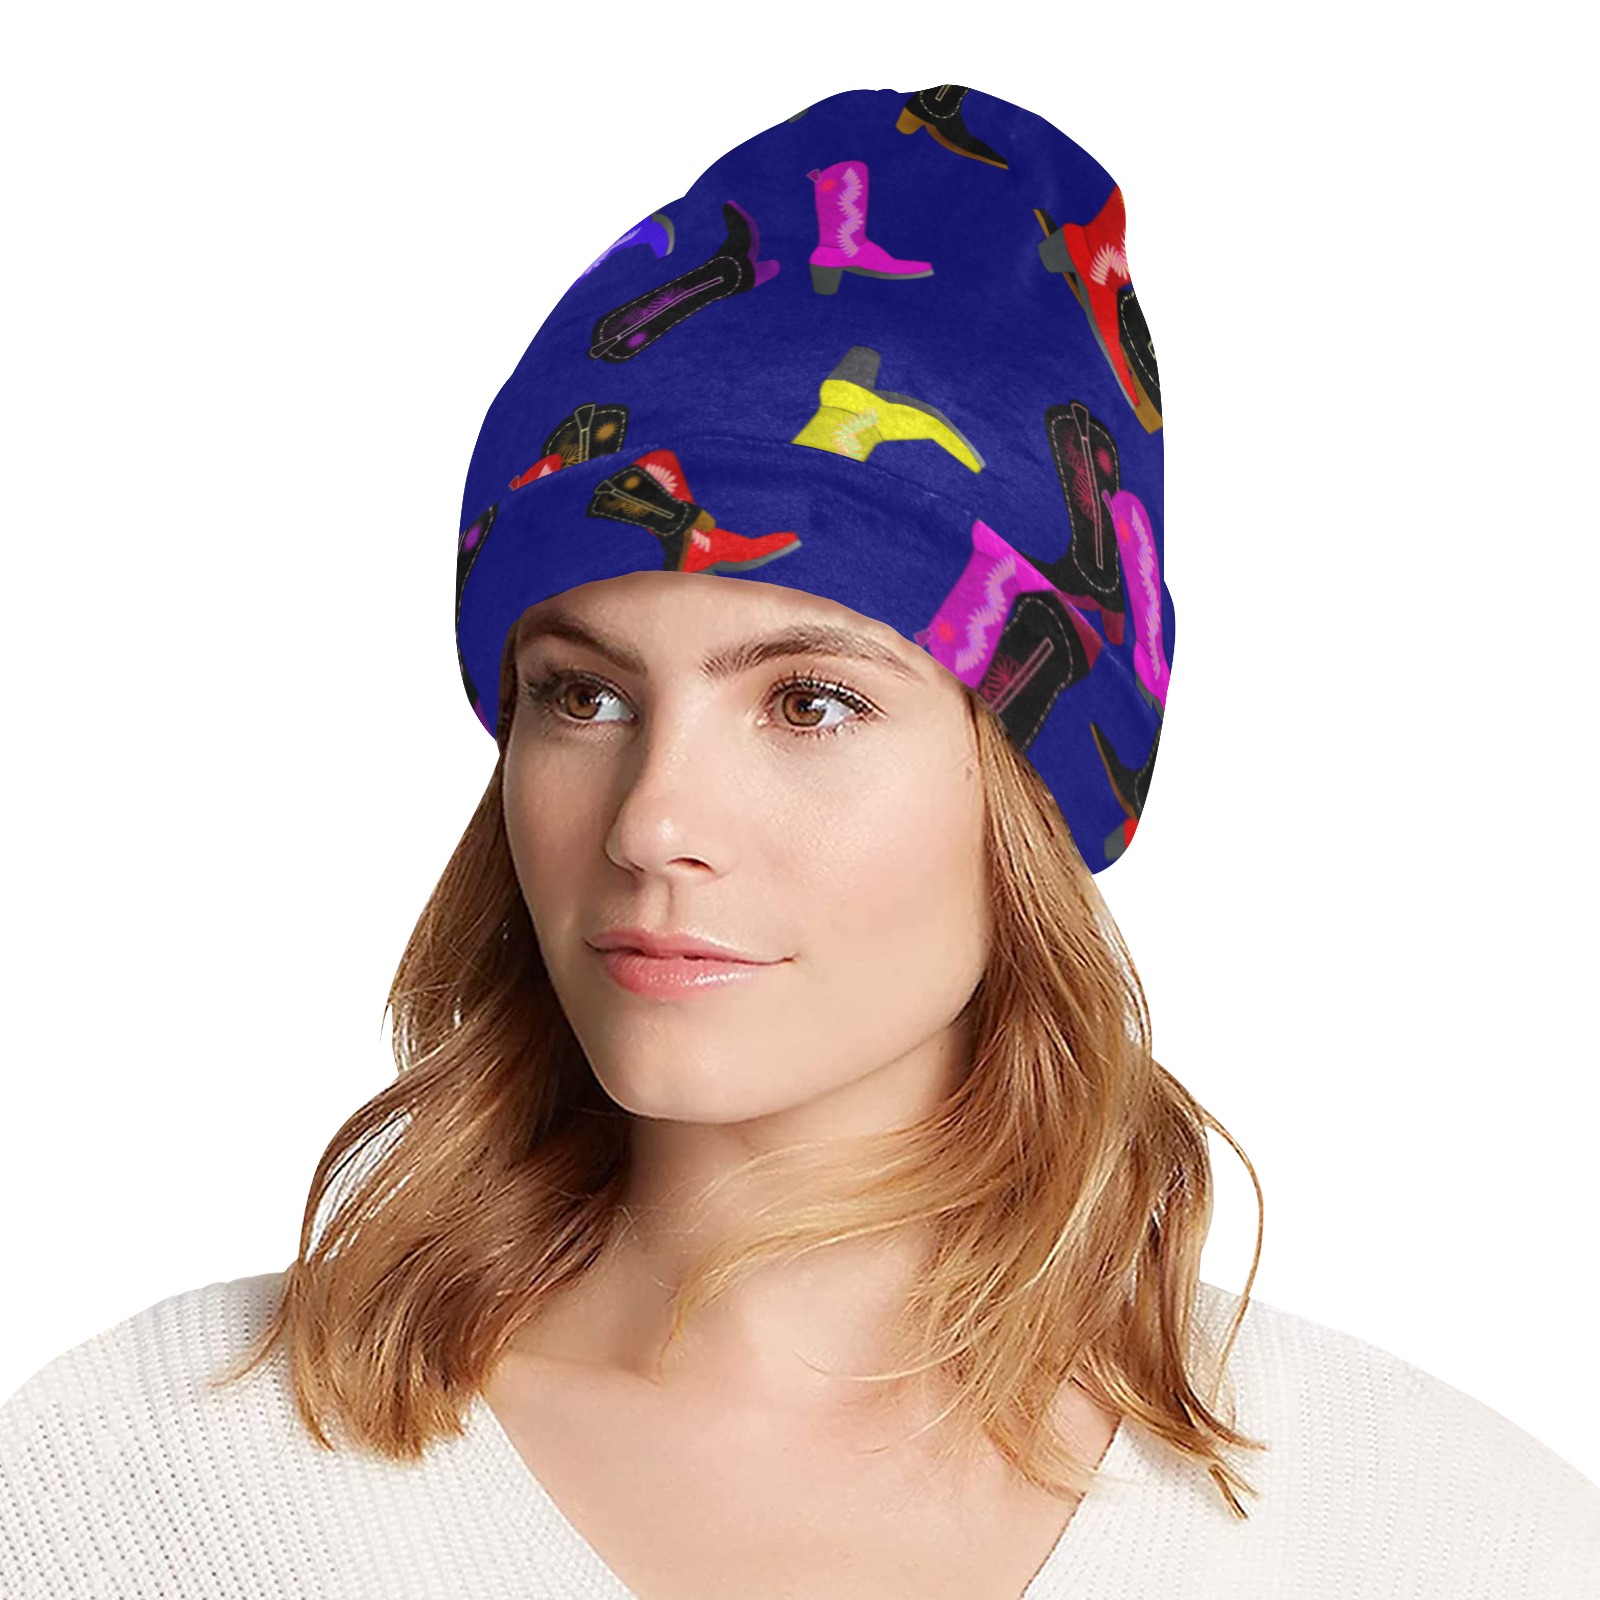 Colorful Cowboy Boots on Blue All Over Print Beanie for Adults